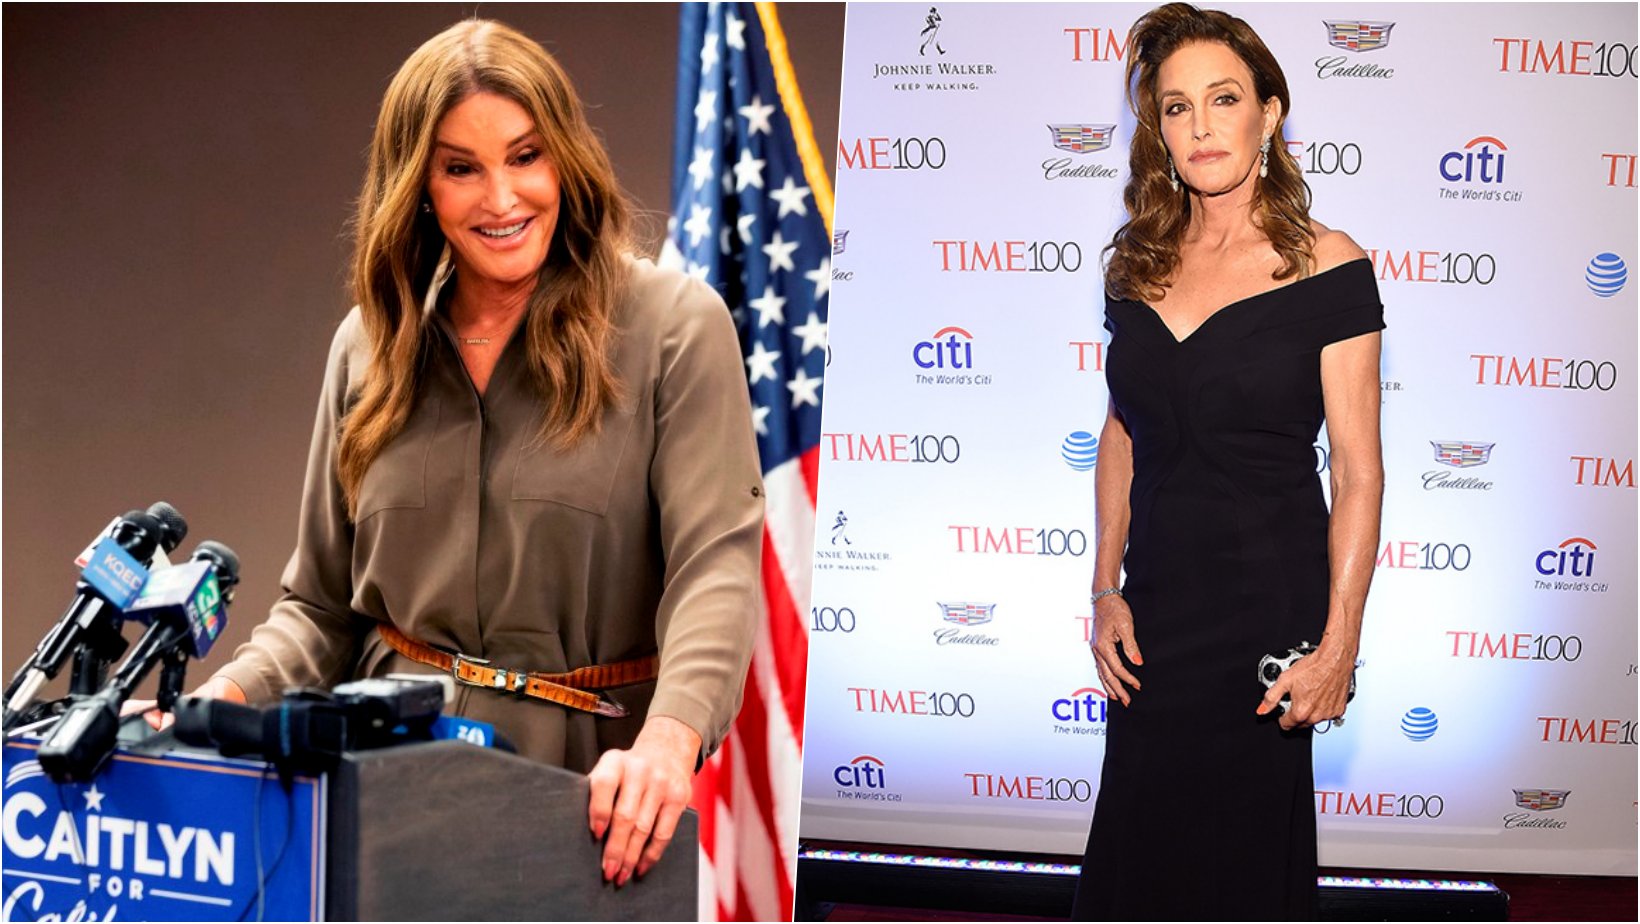 6 facebook cover 9.png?resize=412,232 - Caitlyn Jenner Harassed By Transphobic Troll, Calling The Aspiring Governor “Bruce” & “Sick Freak”